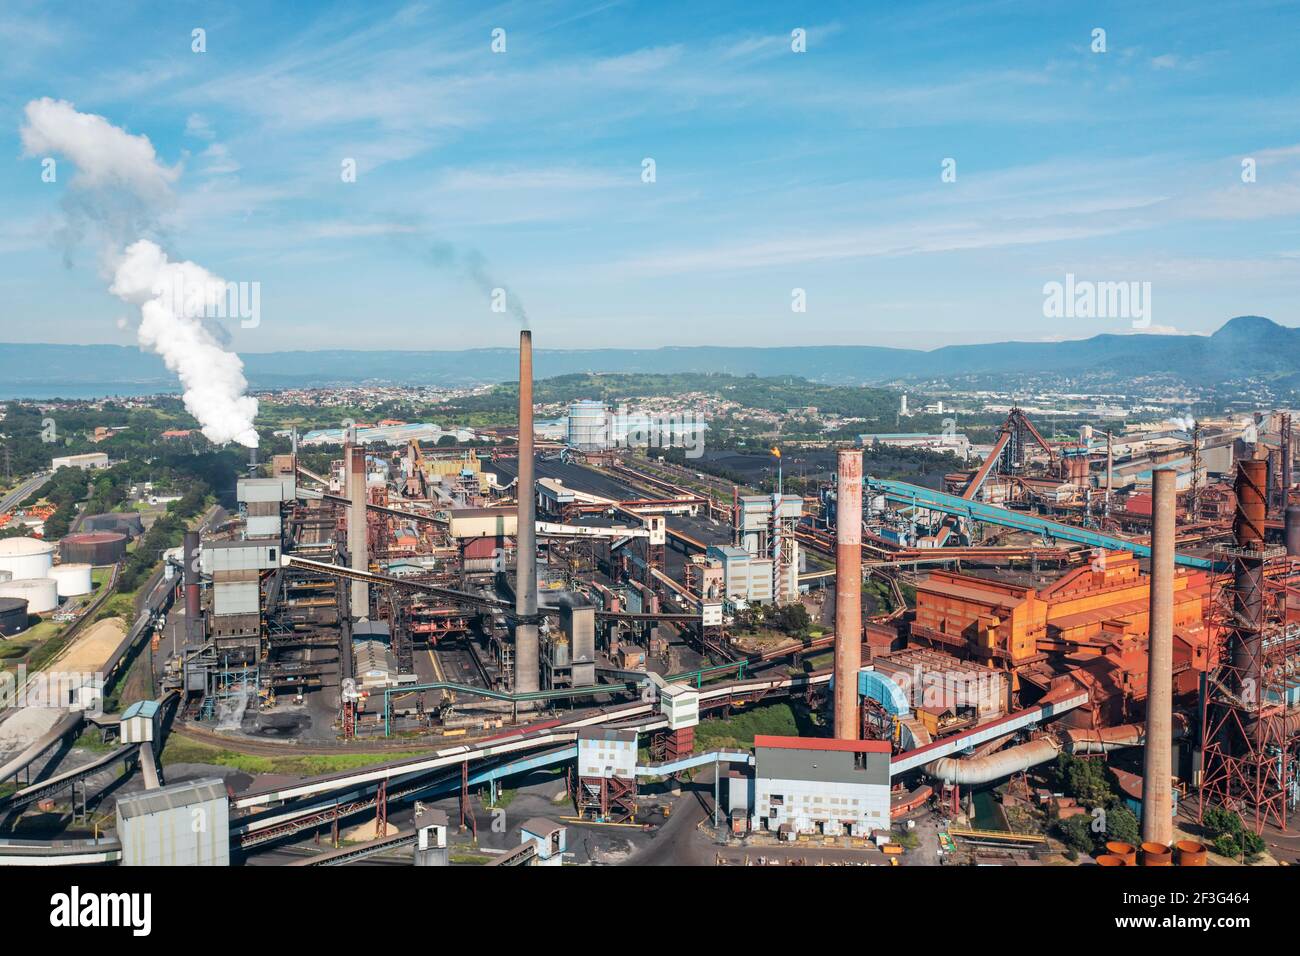 Aerial view of factories and steelworks at Port Kembla, NSW, Australia. Stock Photo